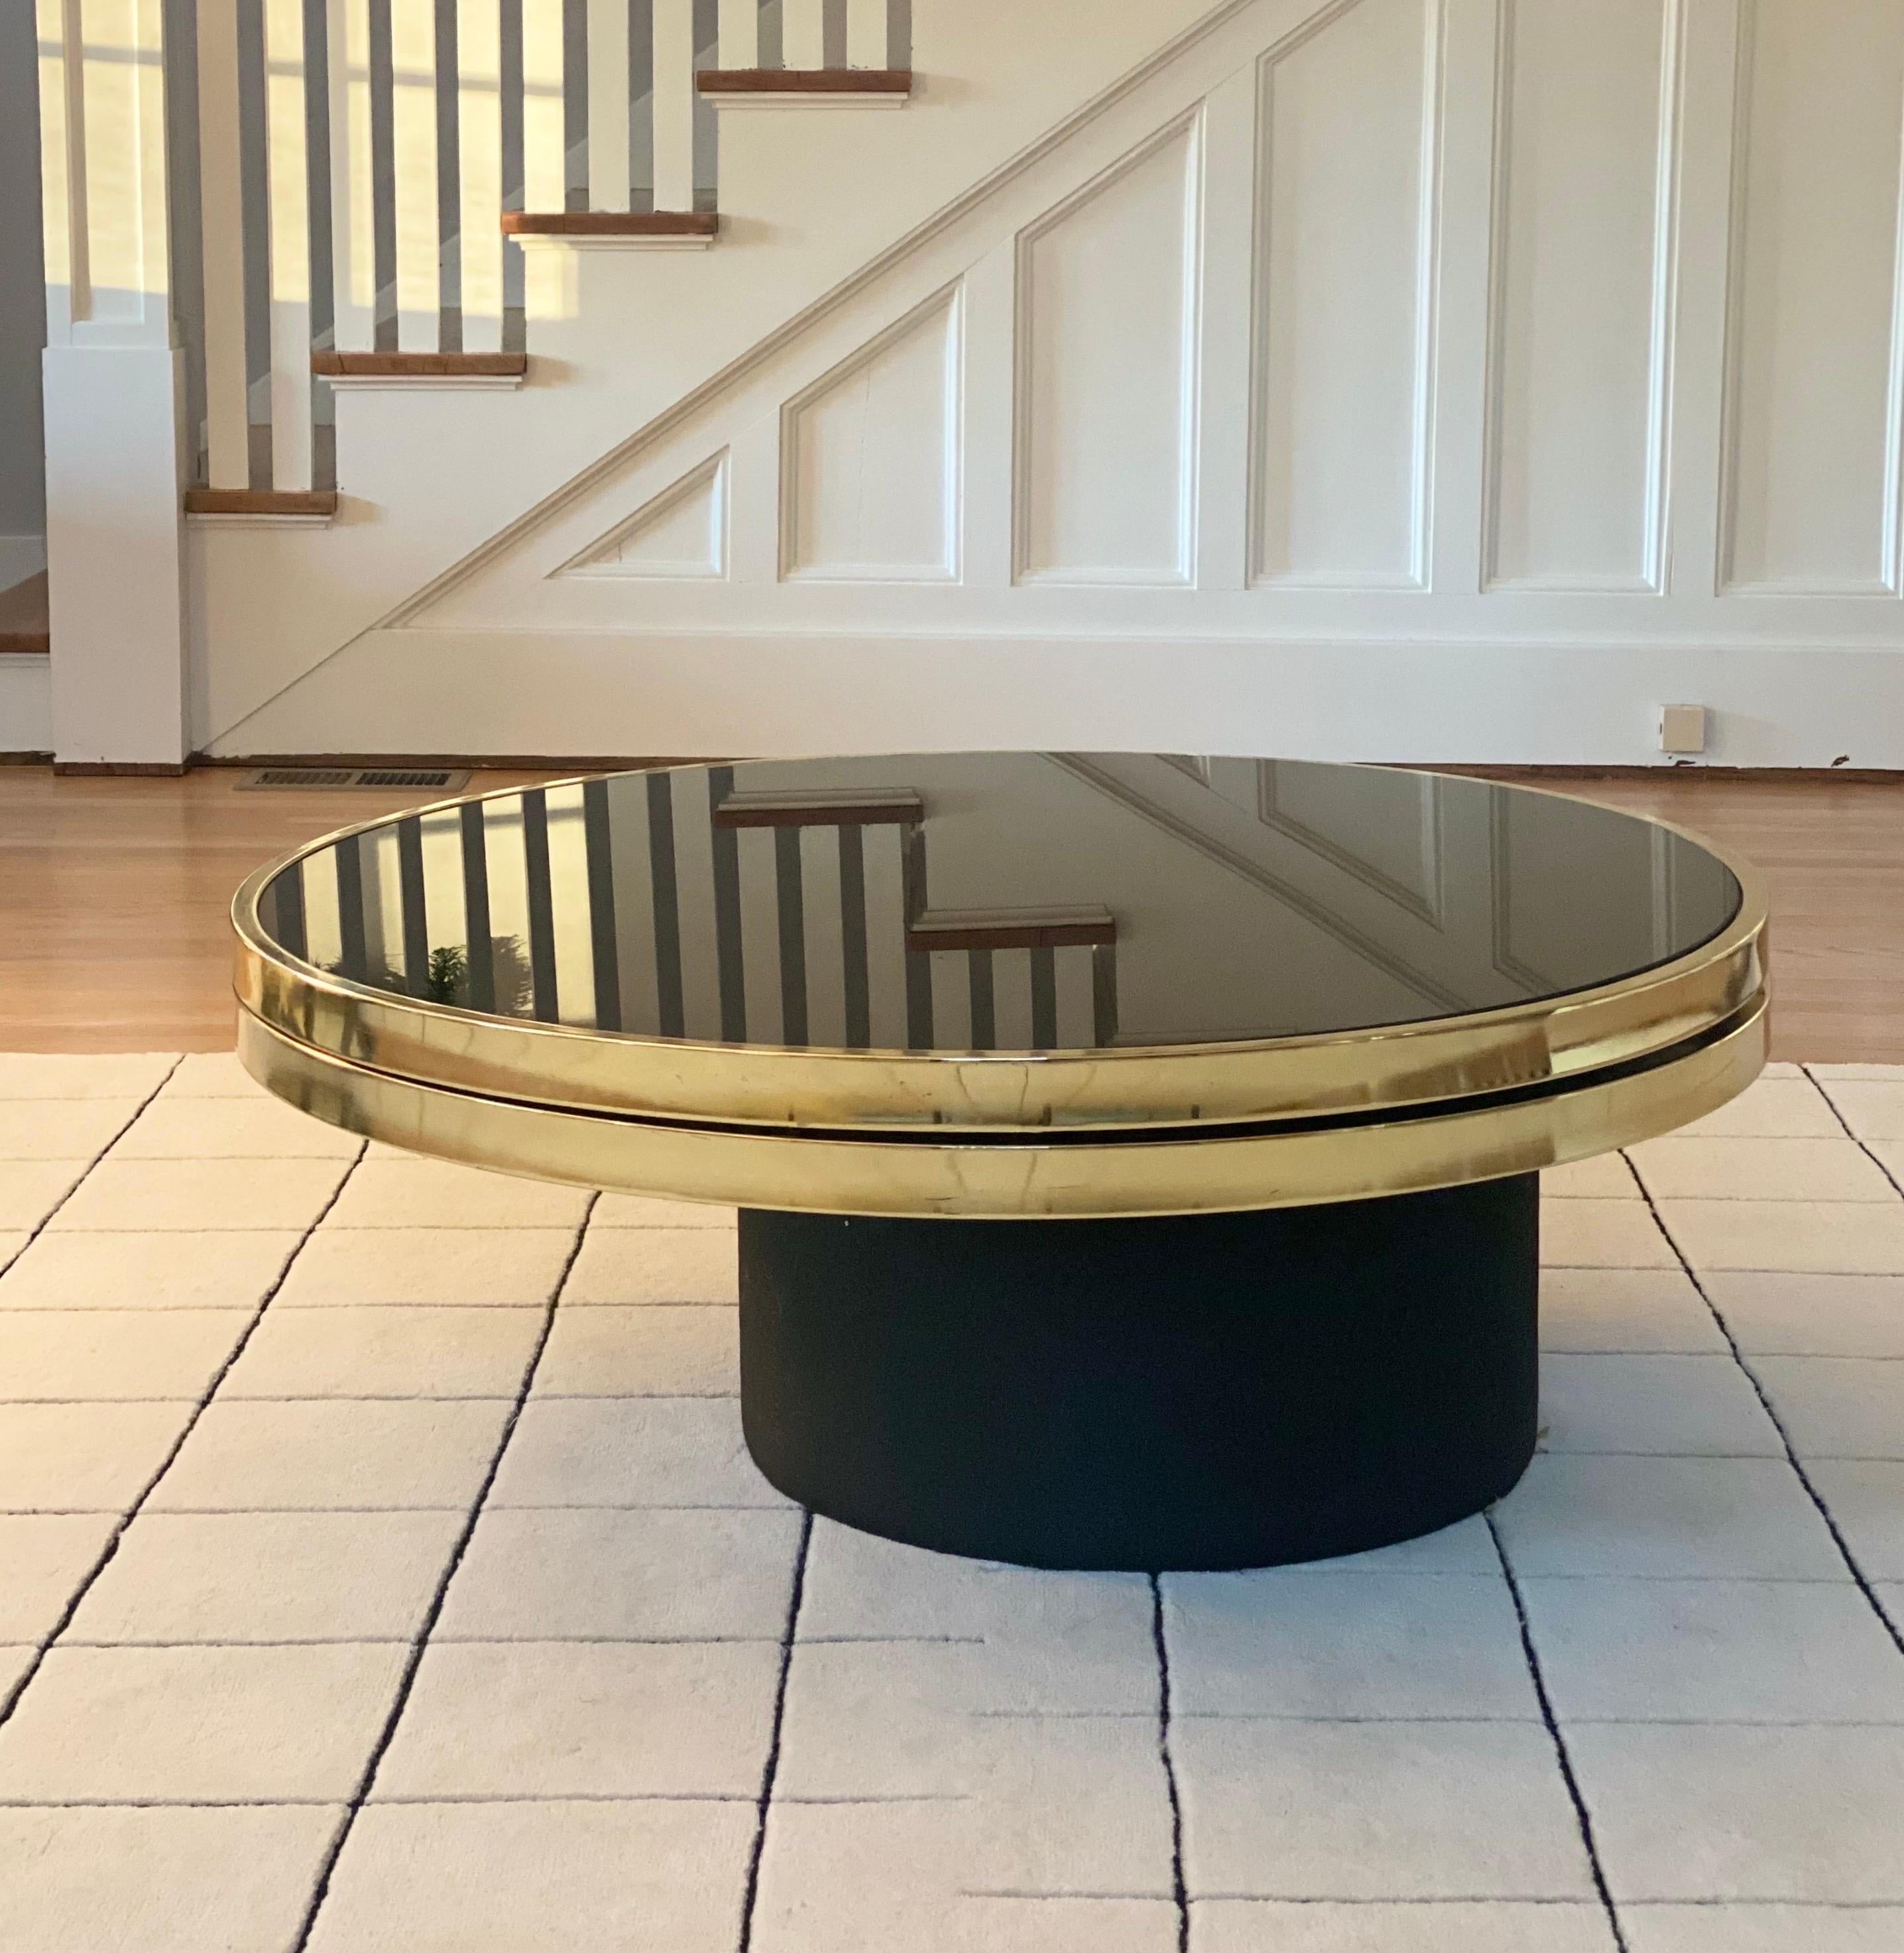 We are very pleased to offer a minimalist and modern coffee table by Richard D. Berry Jr for Design Institute of America, circa the 1970s. Featuring two luxurious, glass plate insets with polished brass edging and a black fabric covered drum base,